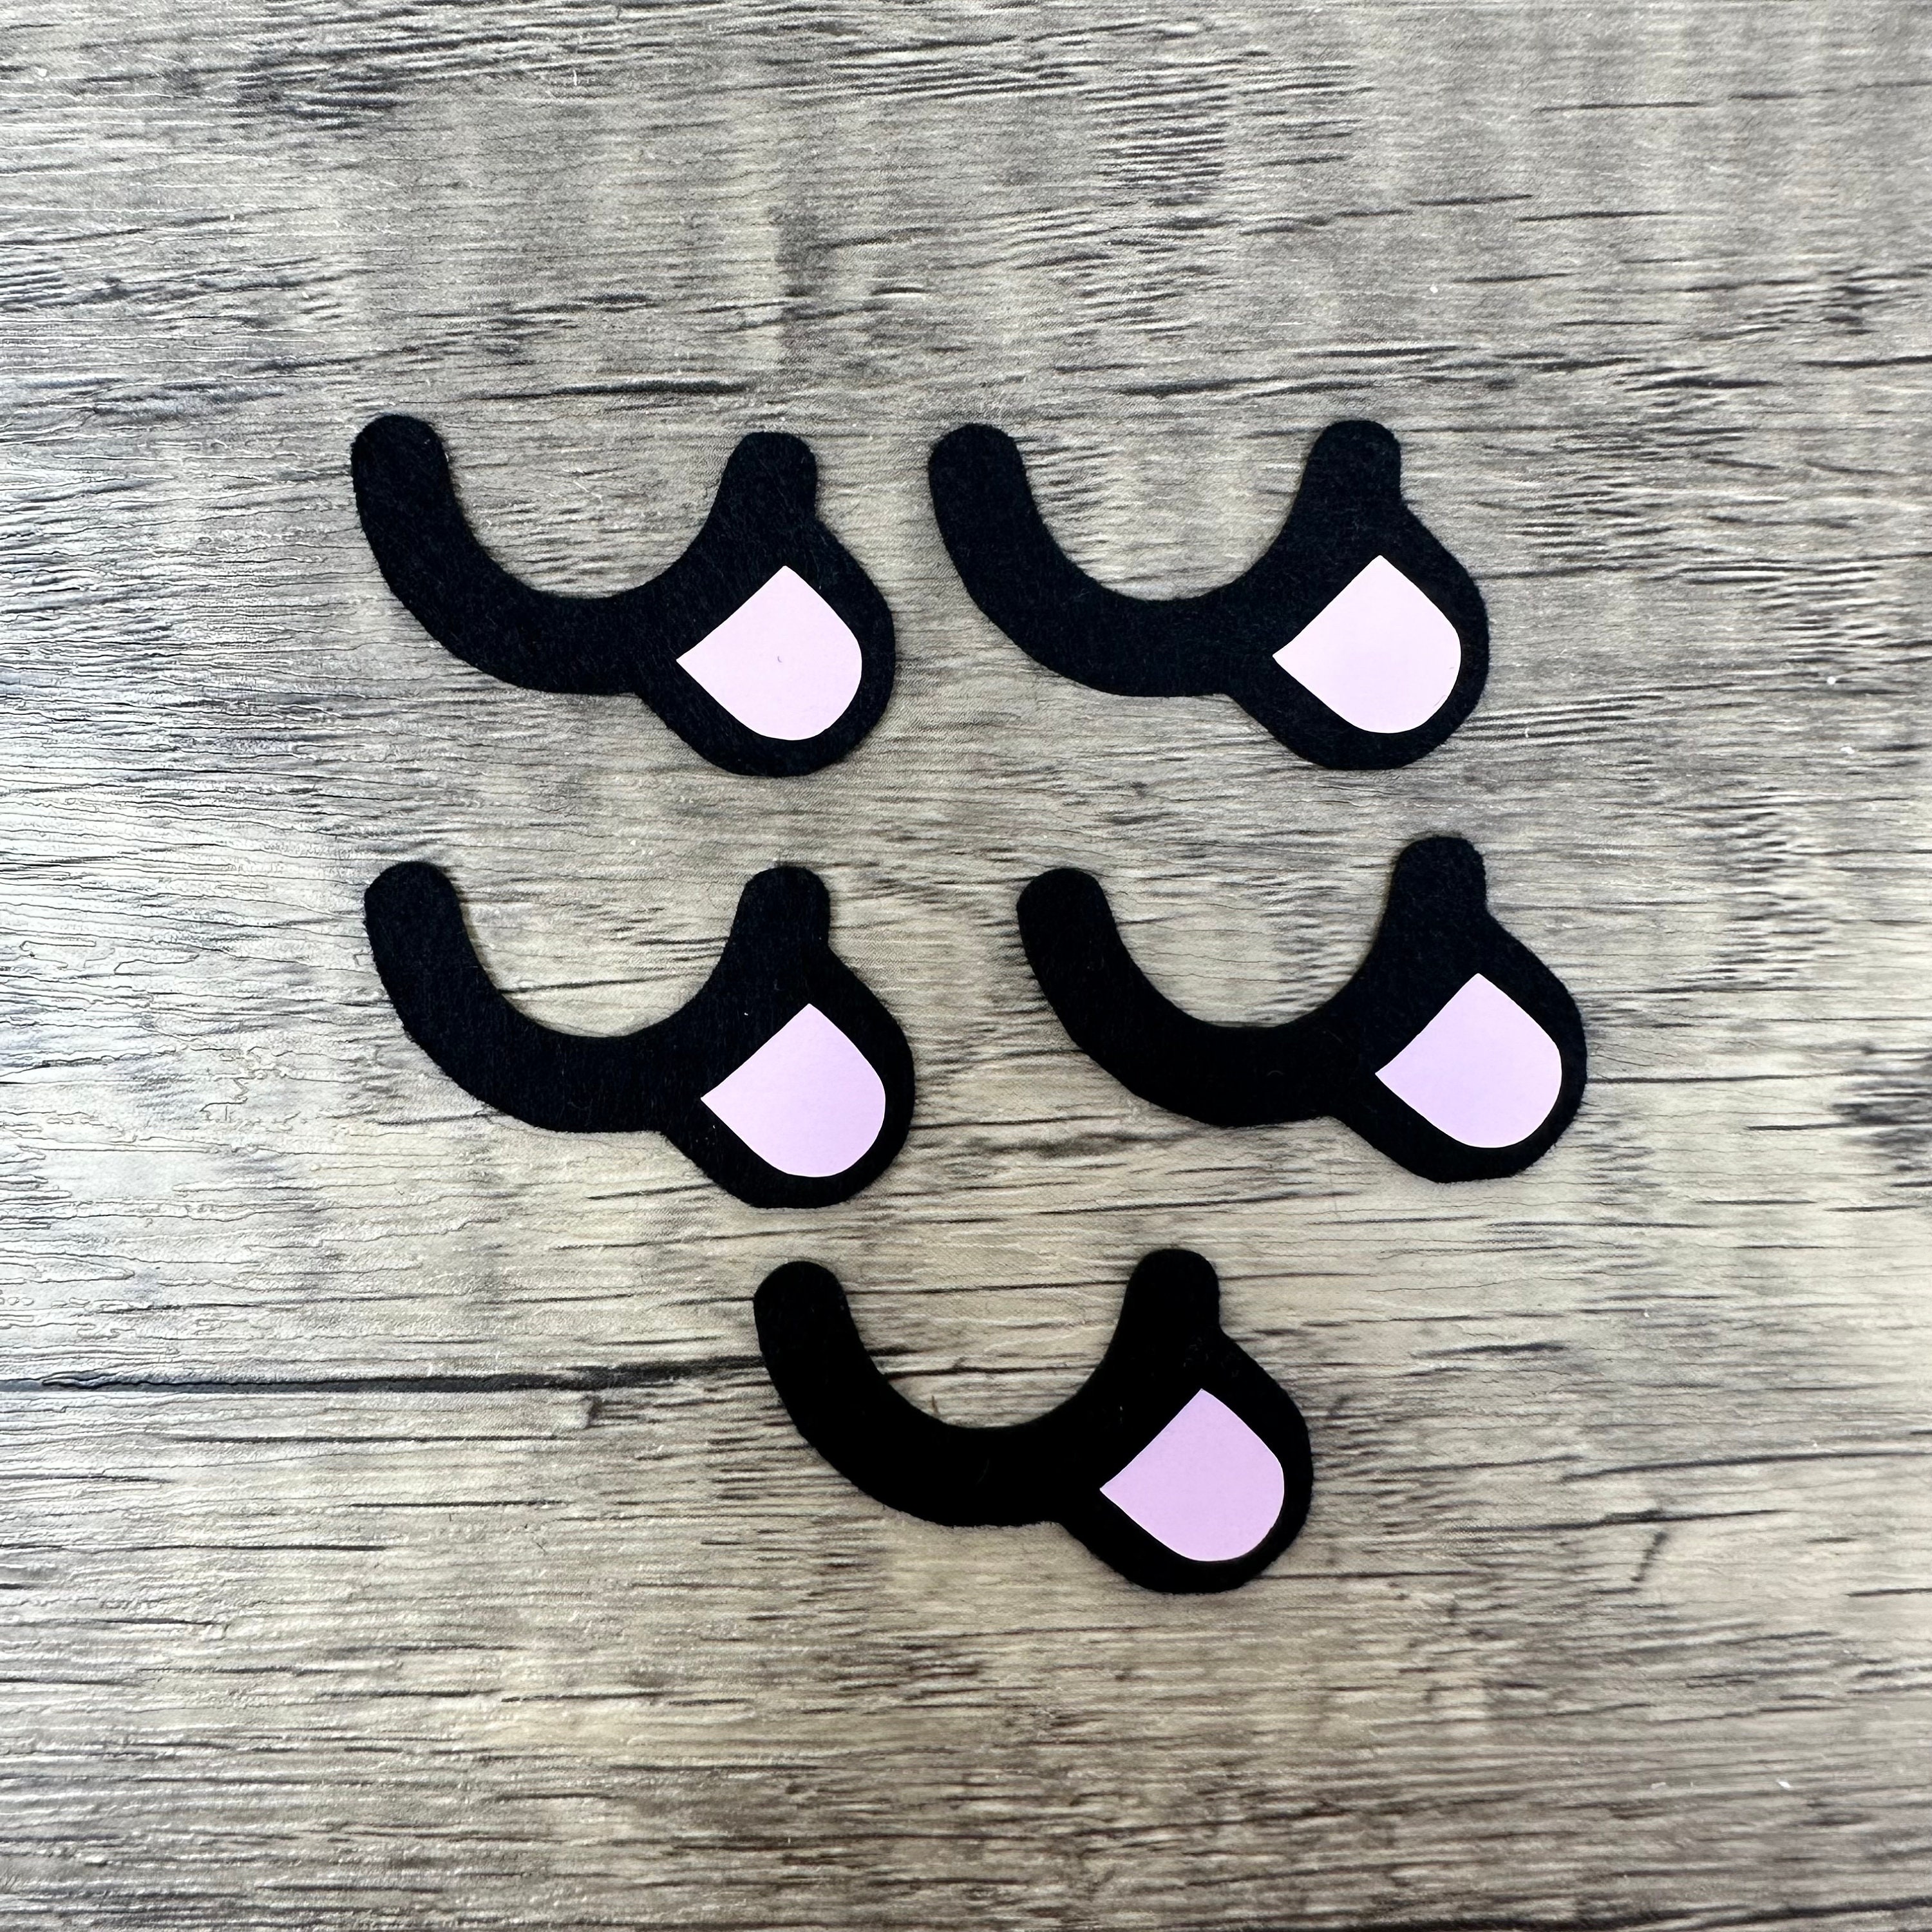 The felt eyes and noses that will be dropping tomorrow! 5pm EST